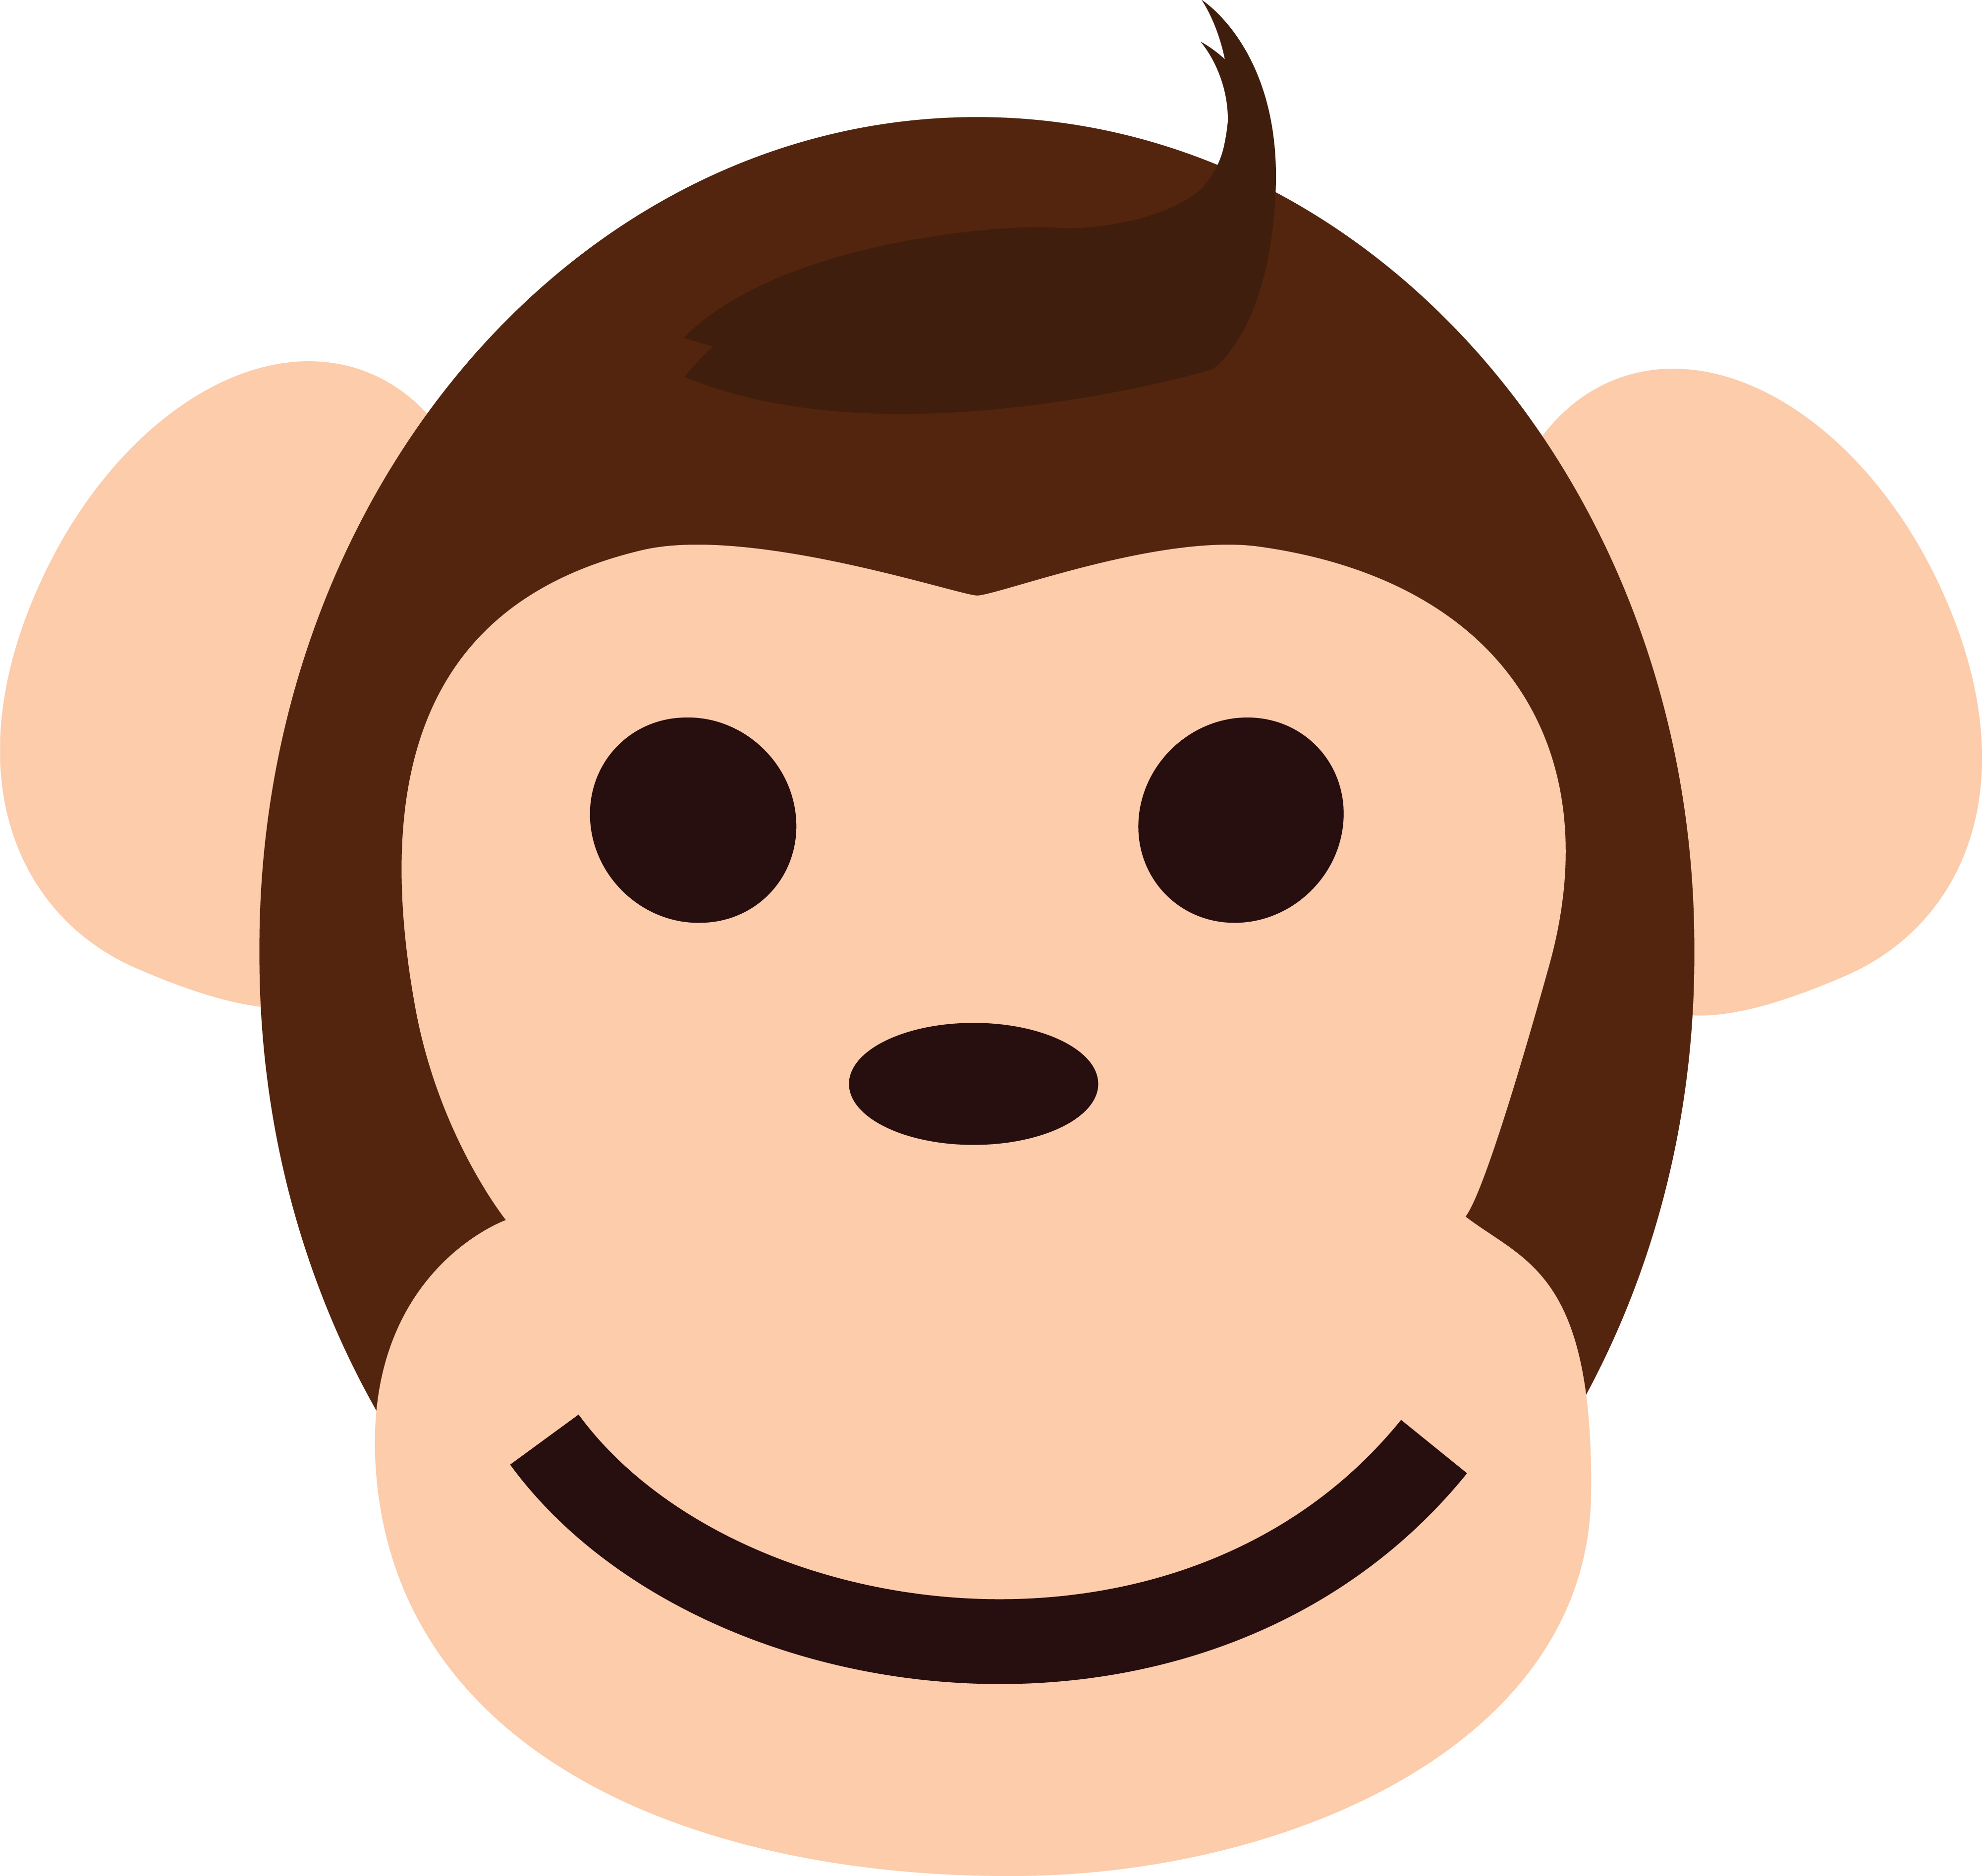 Free Clipart Of A happy monkey face #0001934 .